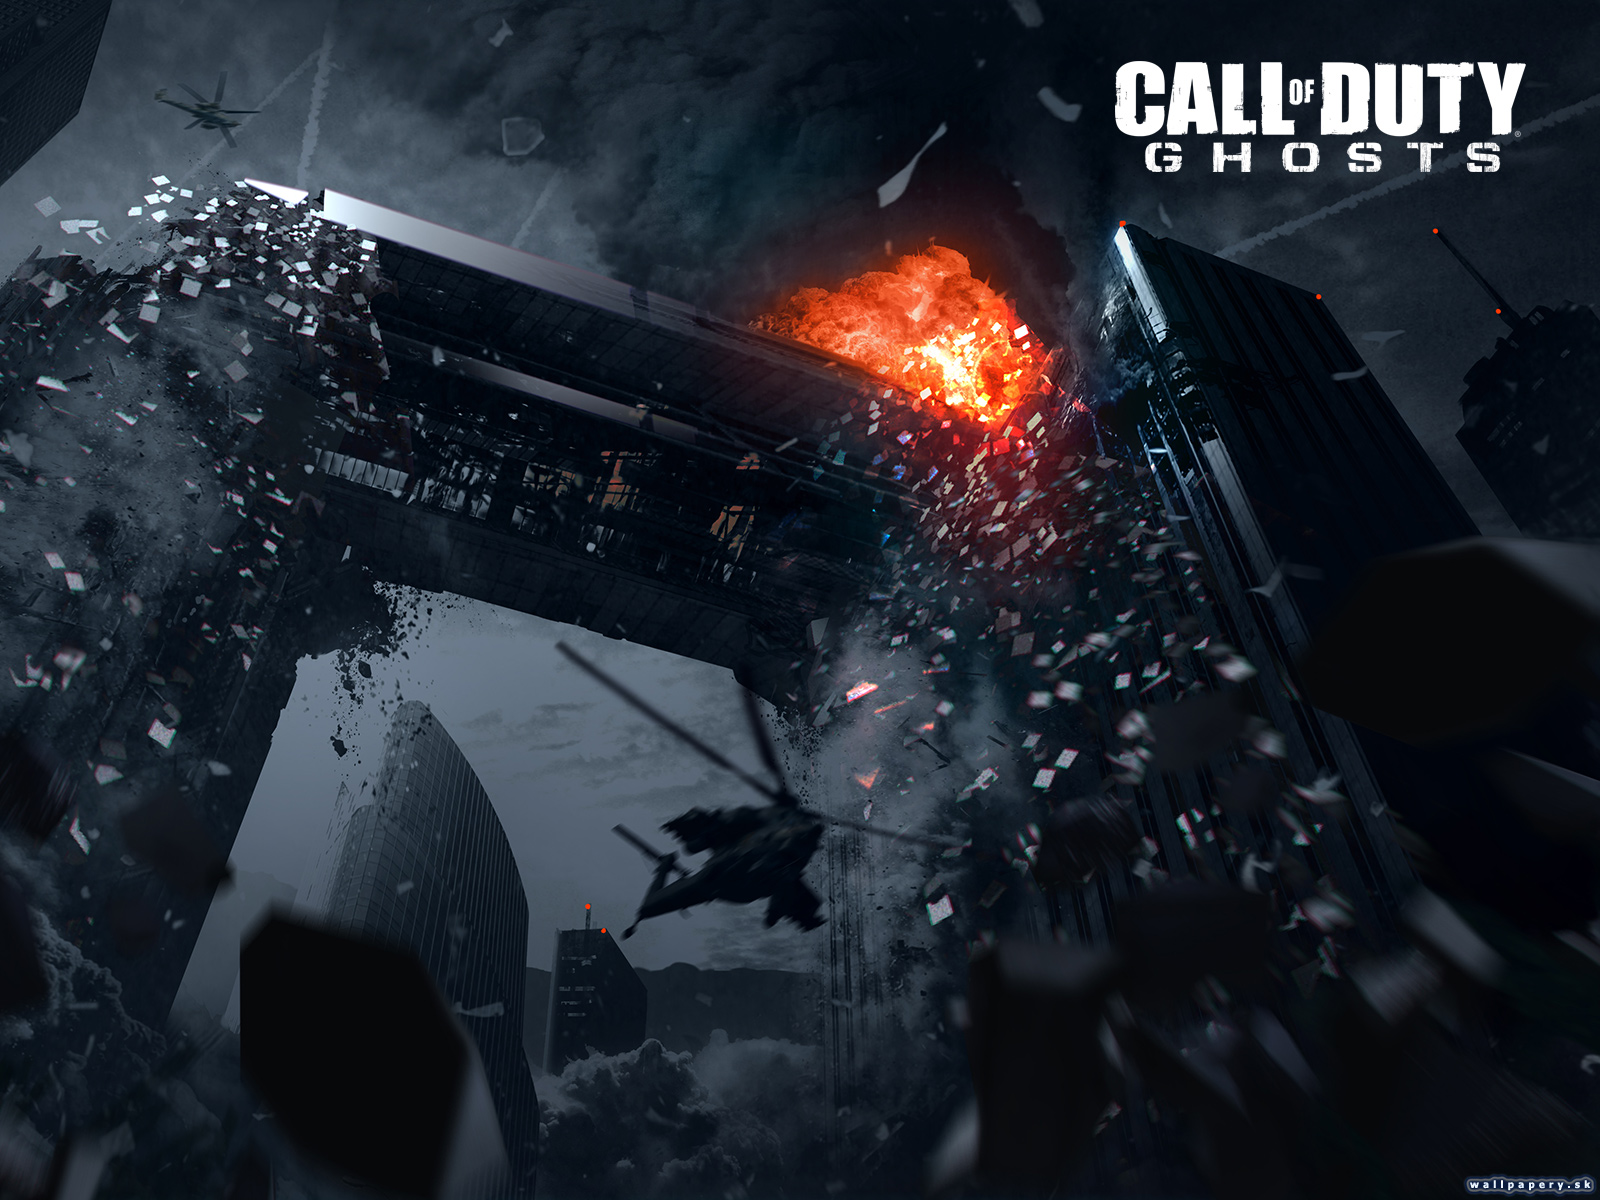 Call of Duty: Ghosts - wallpaper 6